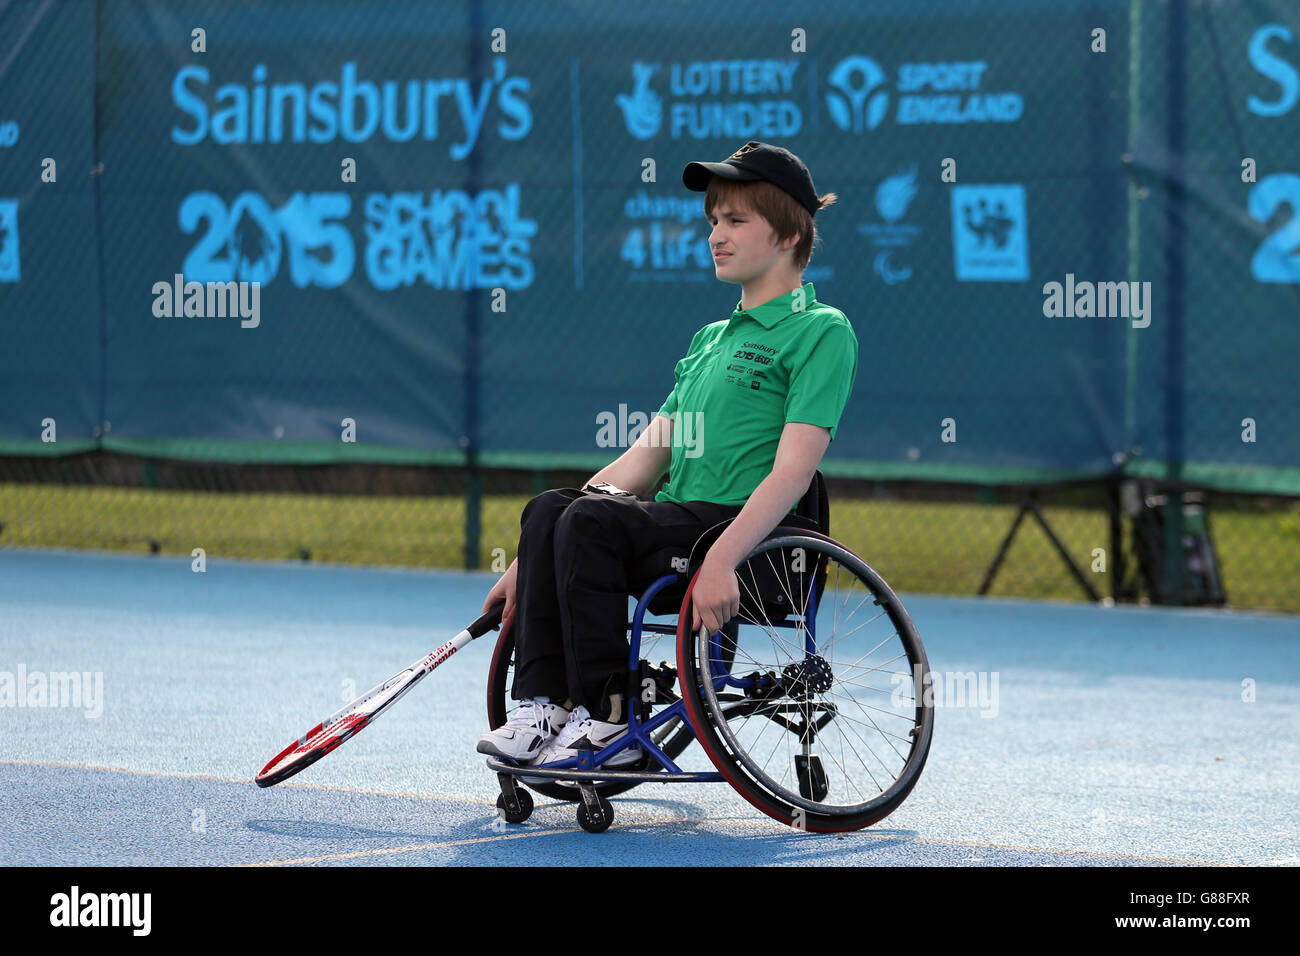 Sport - Sainsbury's 2015 School Games - Day Two - Manchester. Northern Ireland's Ross Gourley during the wheelchair tennis at the Sainsbury's 2015 School Games at the Regional Tennis Centre, Manchester. Stock Photo